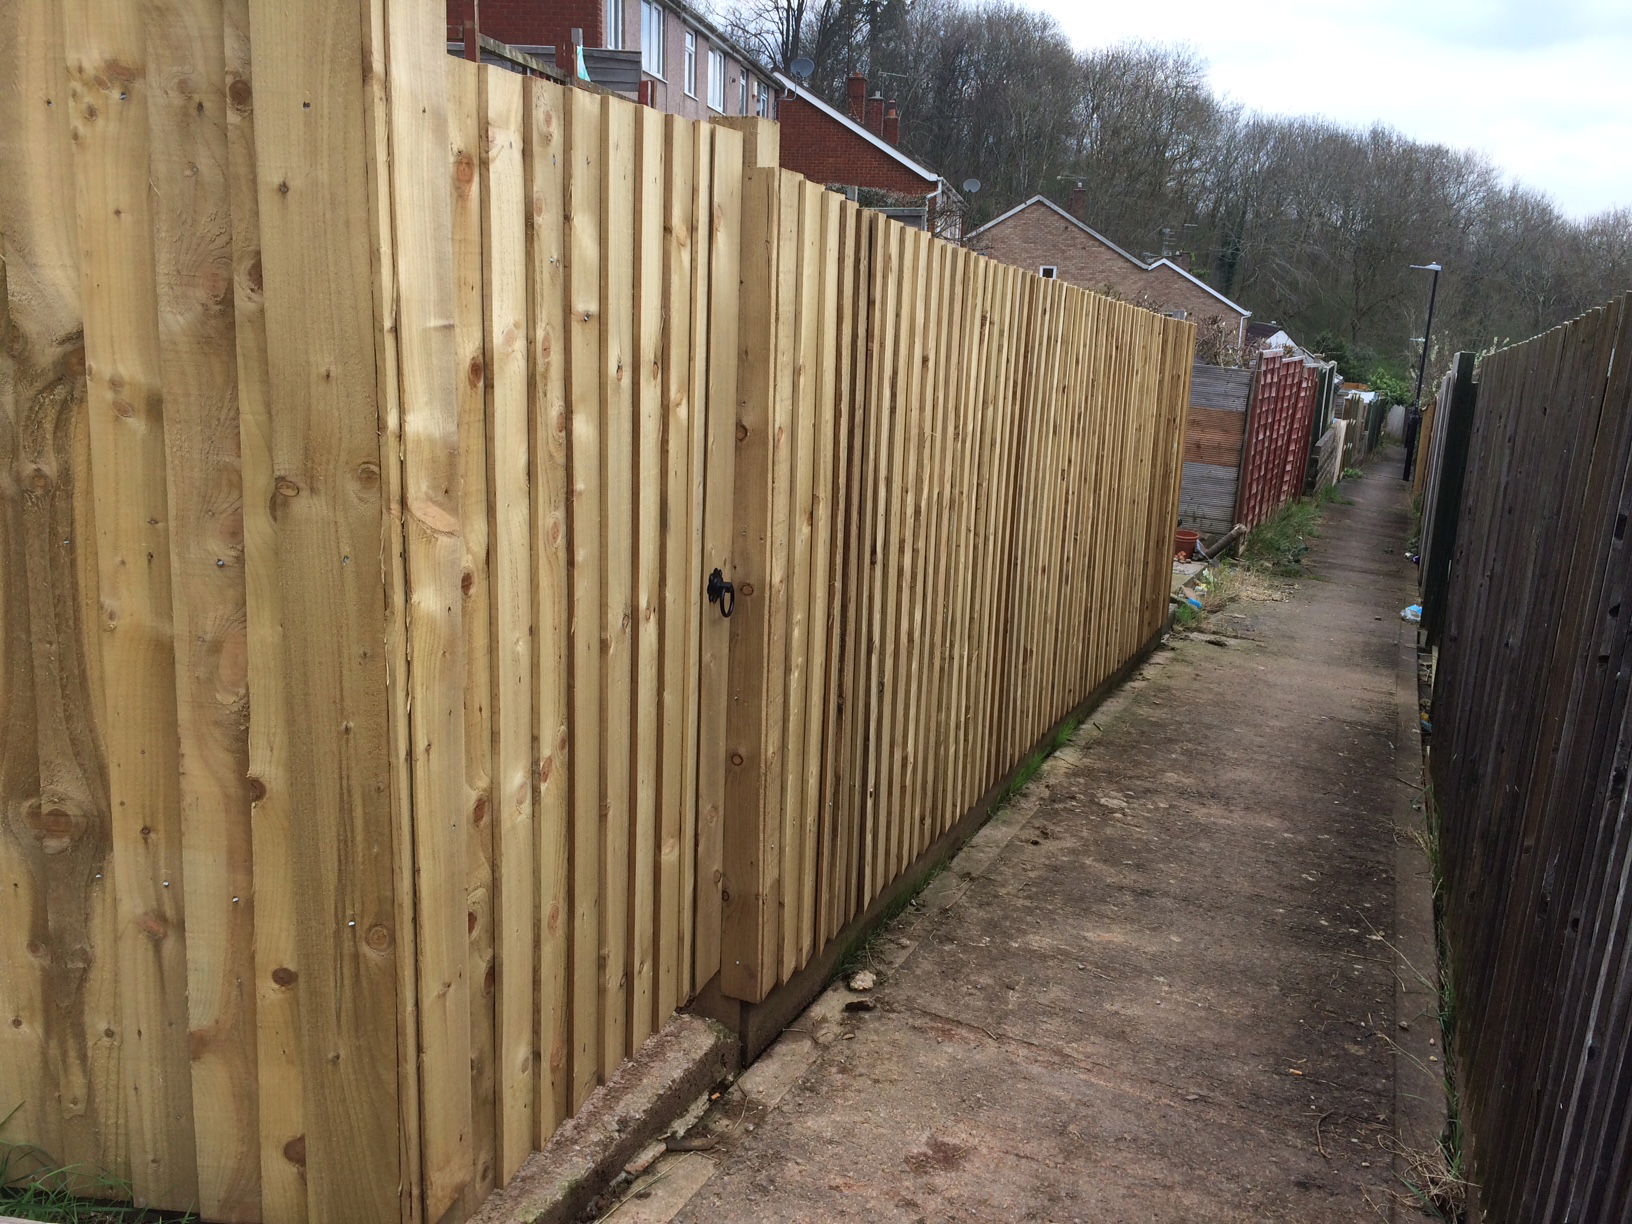 Feather edge fencing and rear entrance gate to match